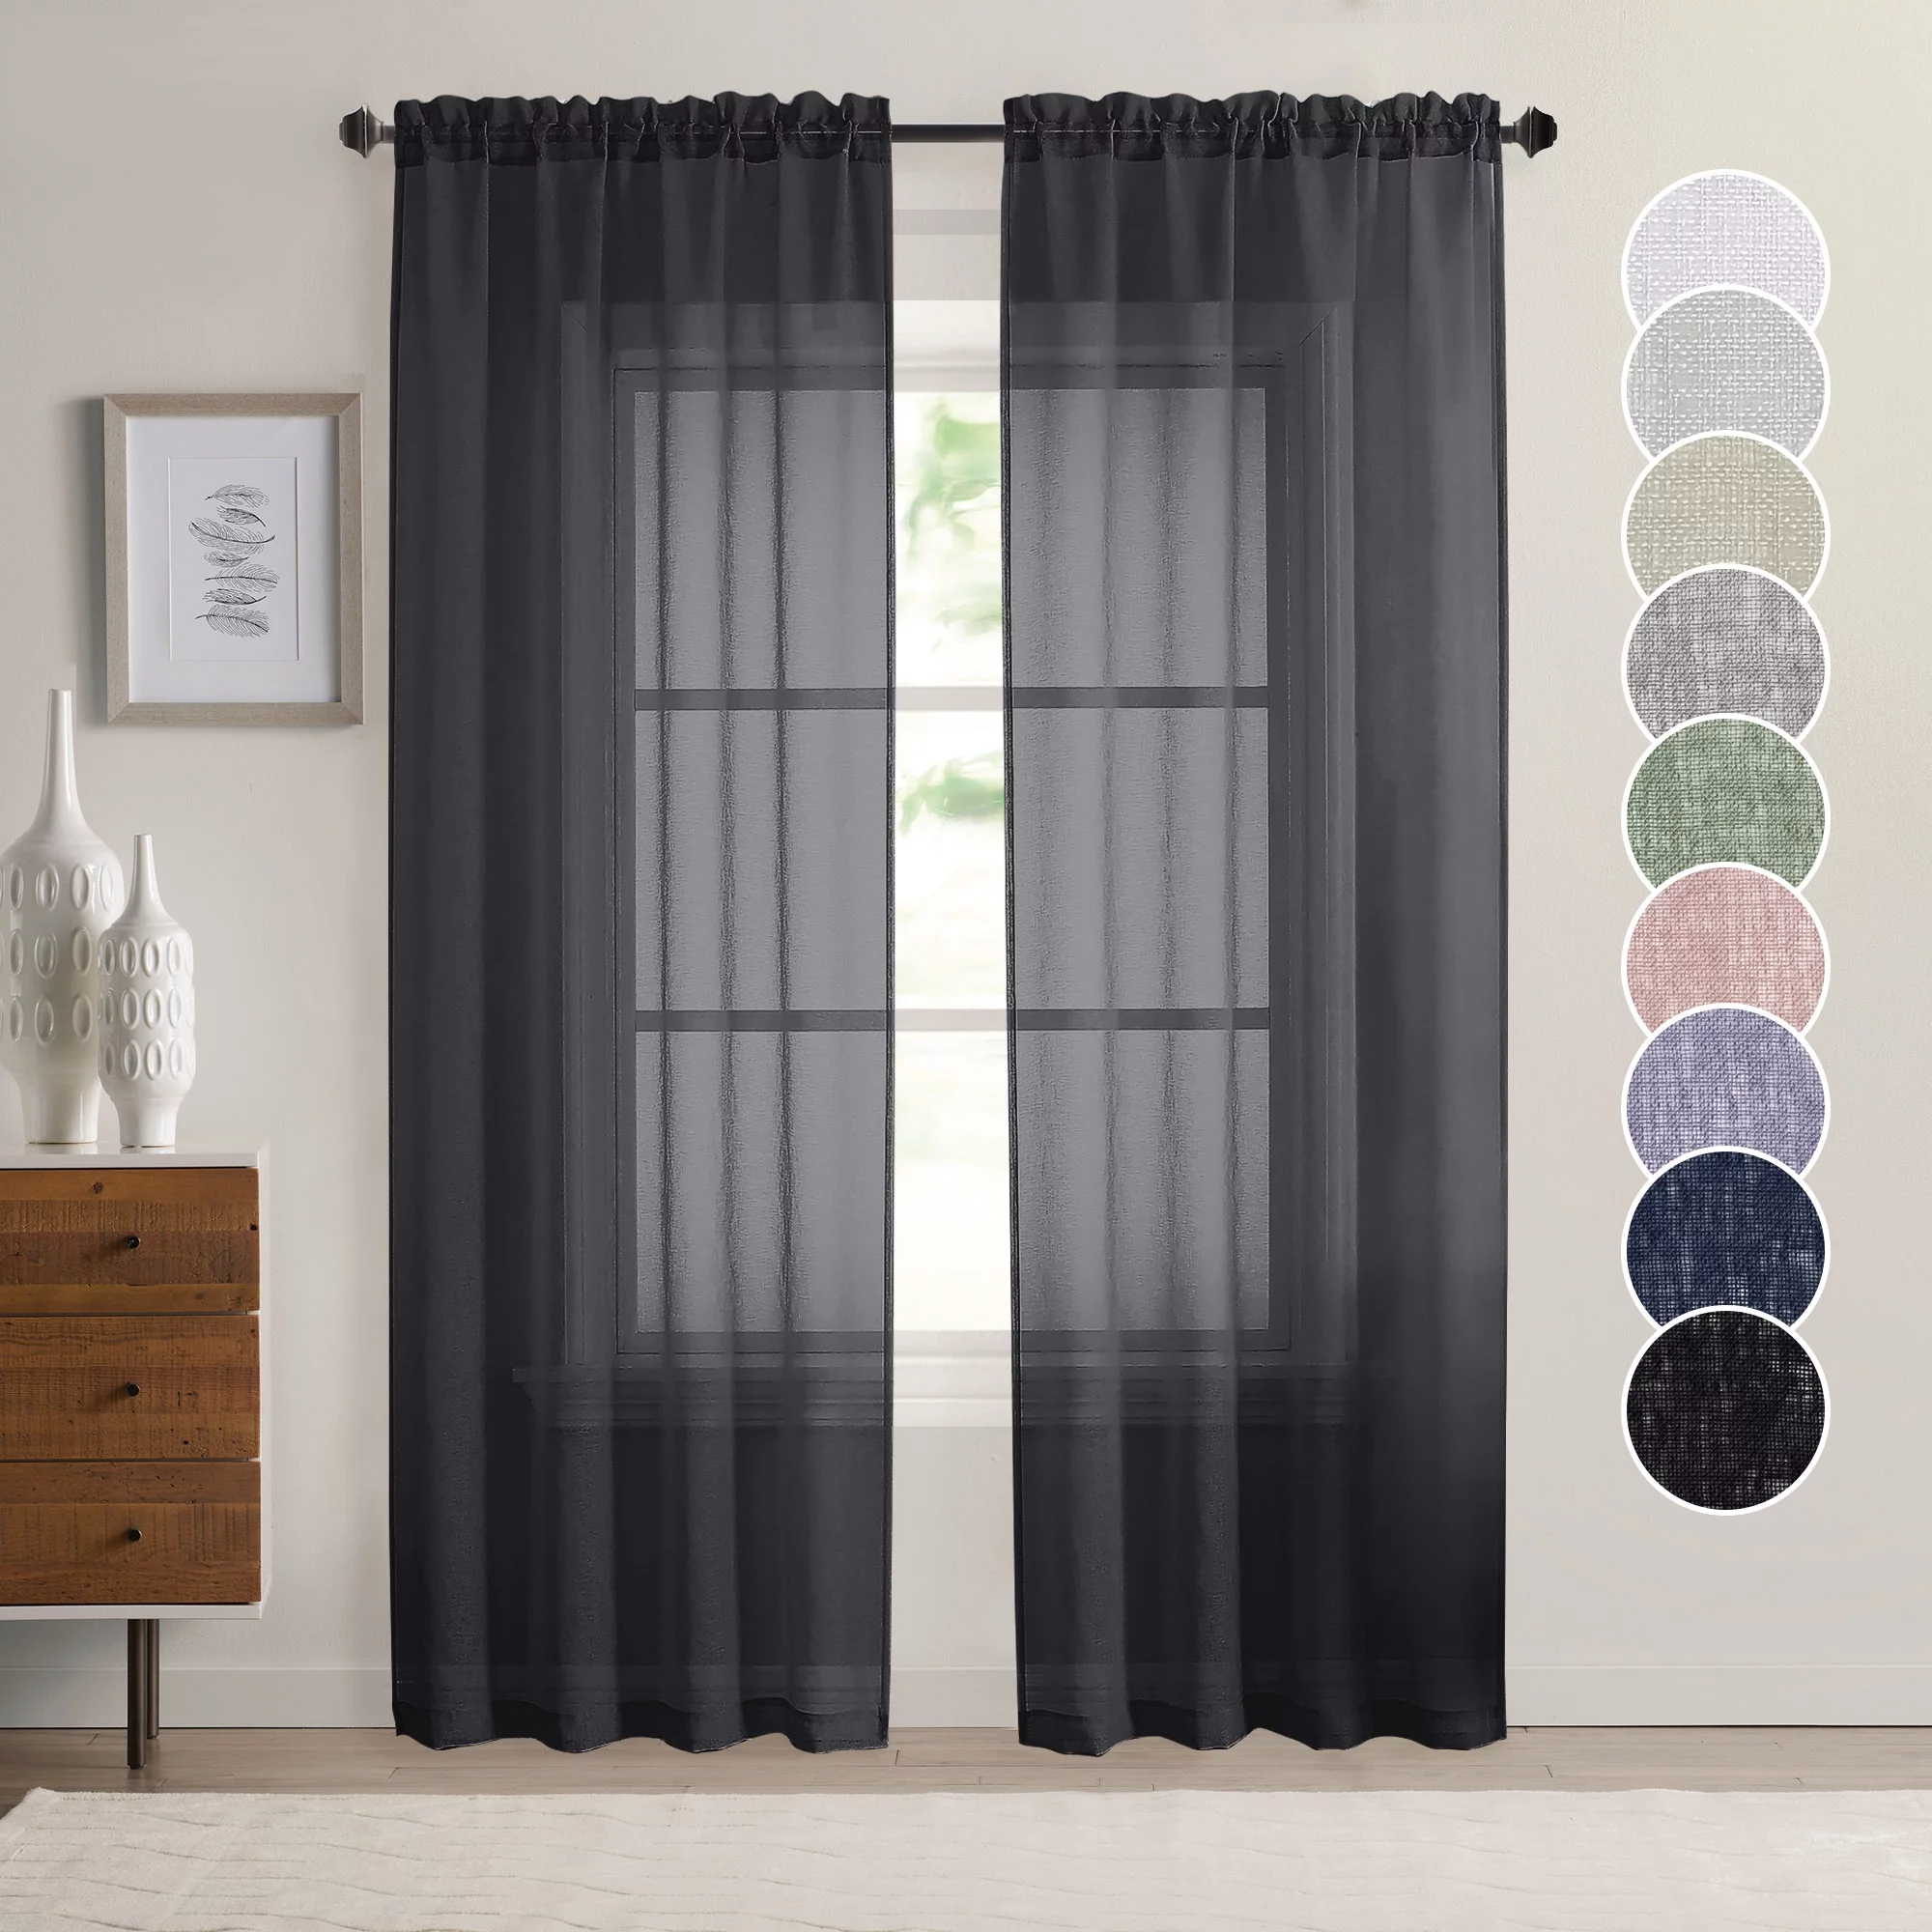 OVZME Dolly Living Room Black Sheer Curtains 84 Inches Long 2 Panels Set, Solid Faux Linen Black Window Treatment for Bed Room,  Faux Linen Dual Rod Pocket Window Covering, 40 inch Wide x 84 inch Long